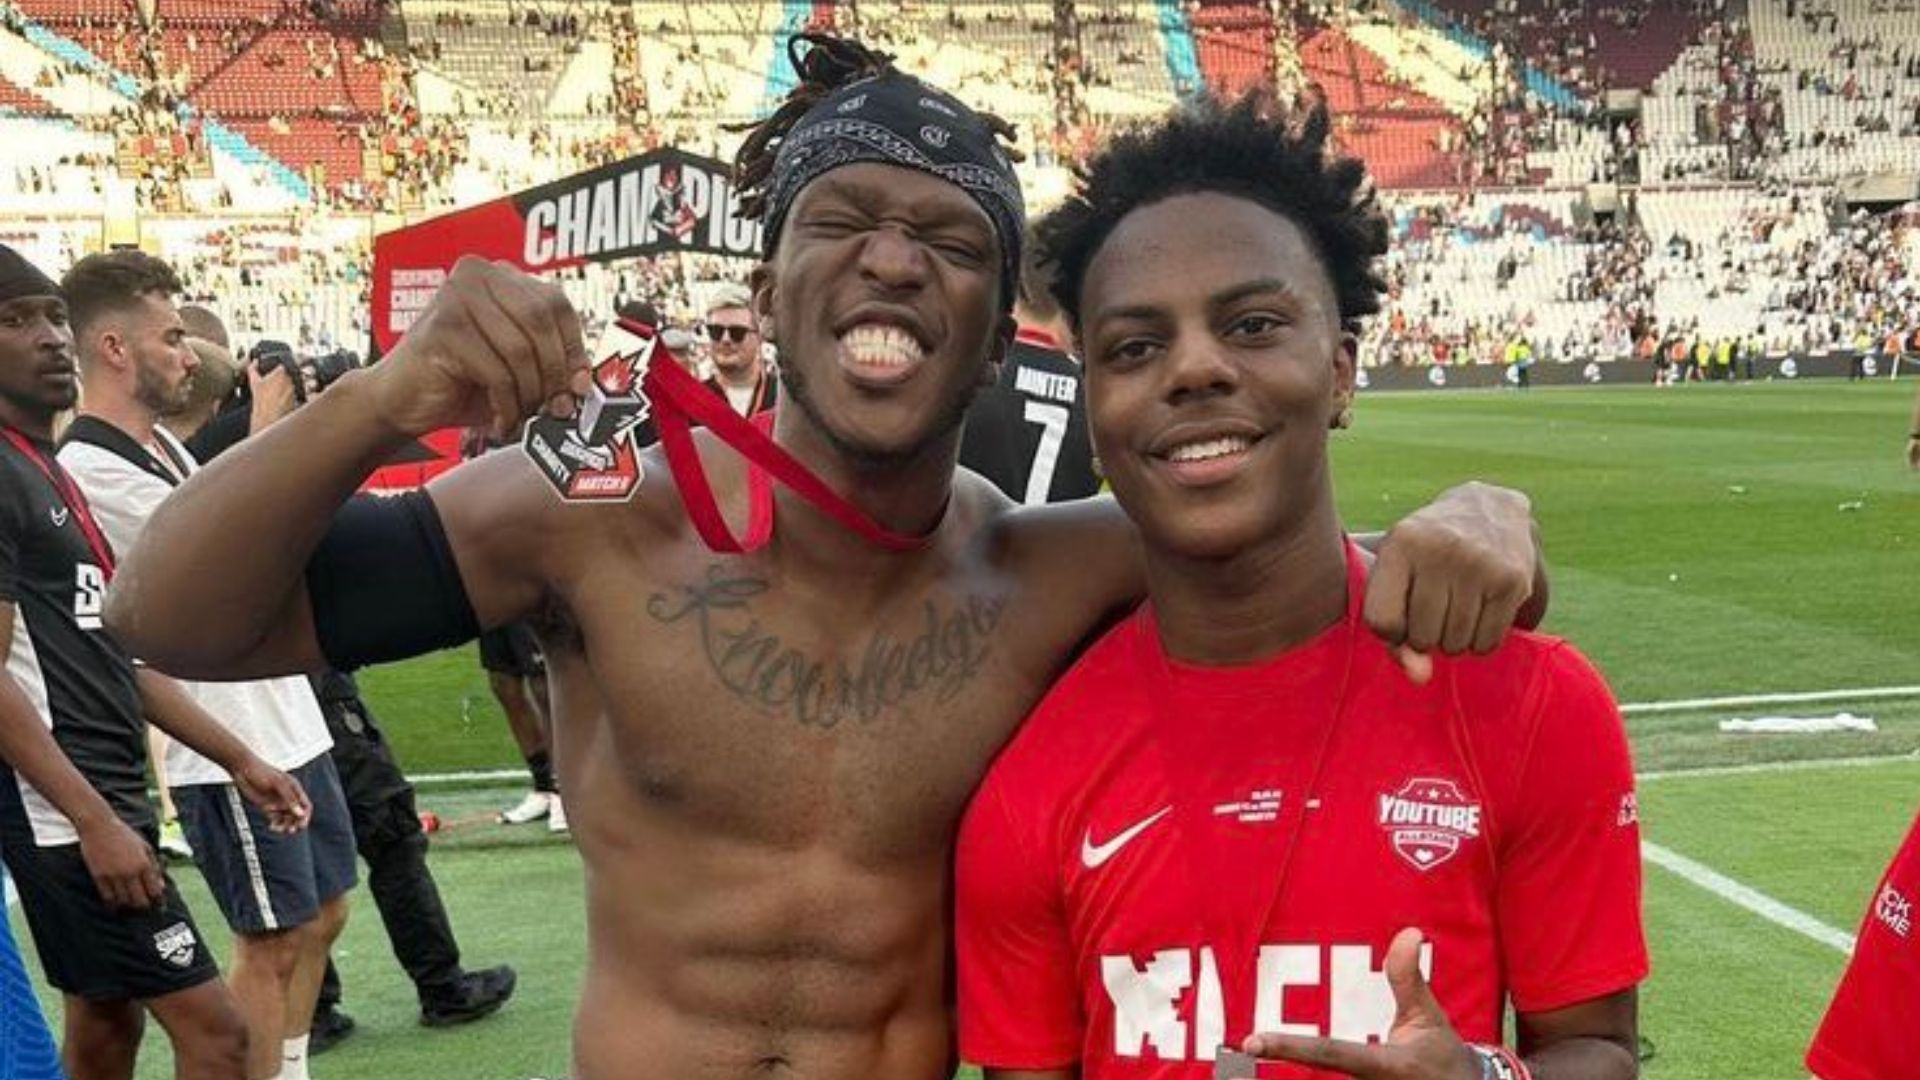 IShowSpeed ‘punched’ KSI during Sidemen Charity Match but stream missed